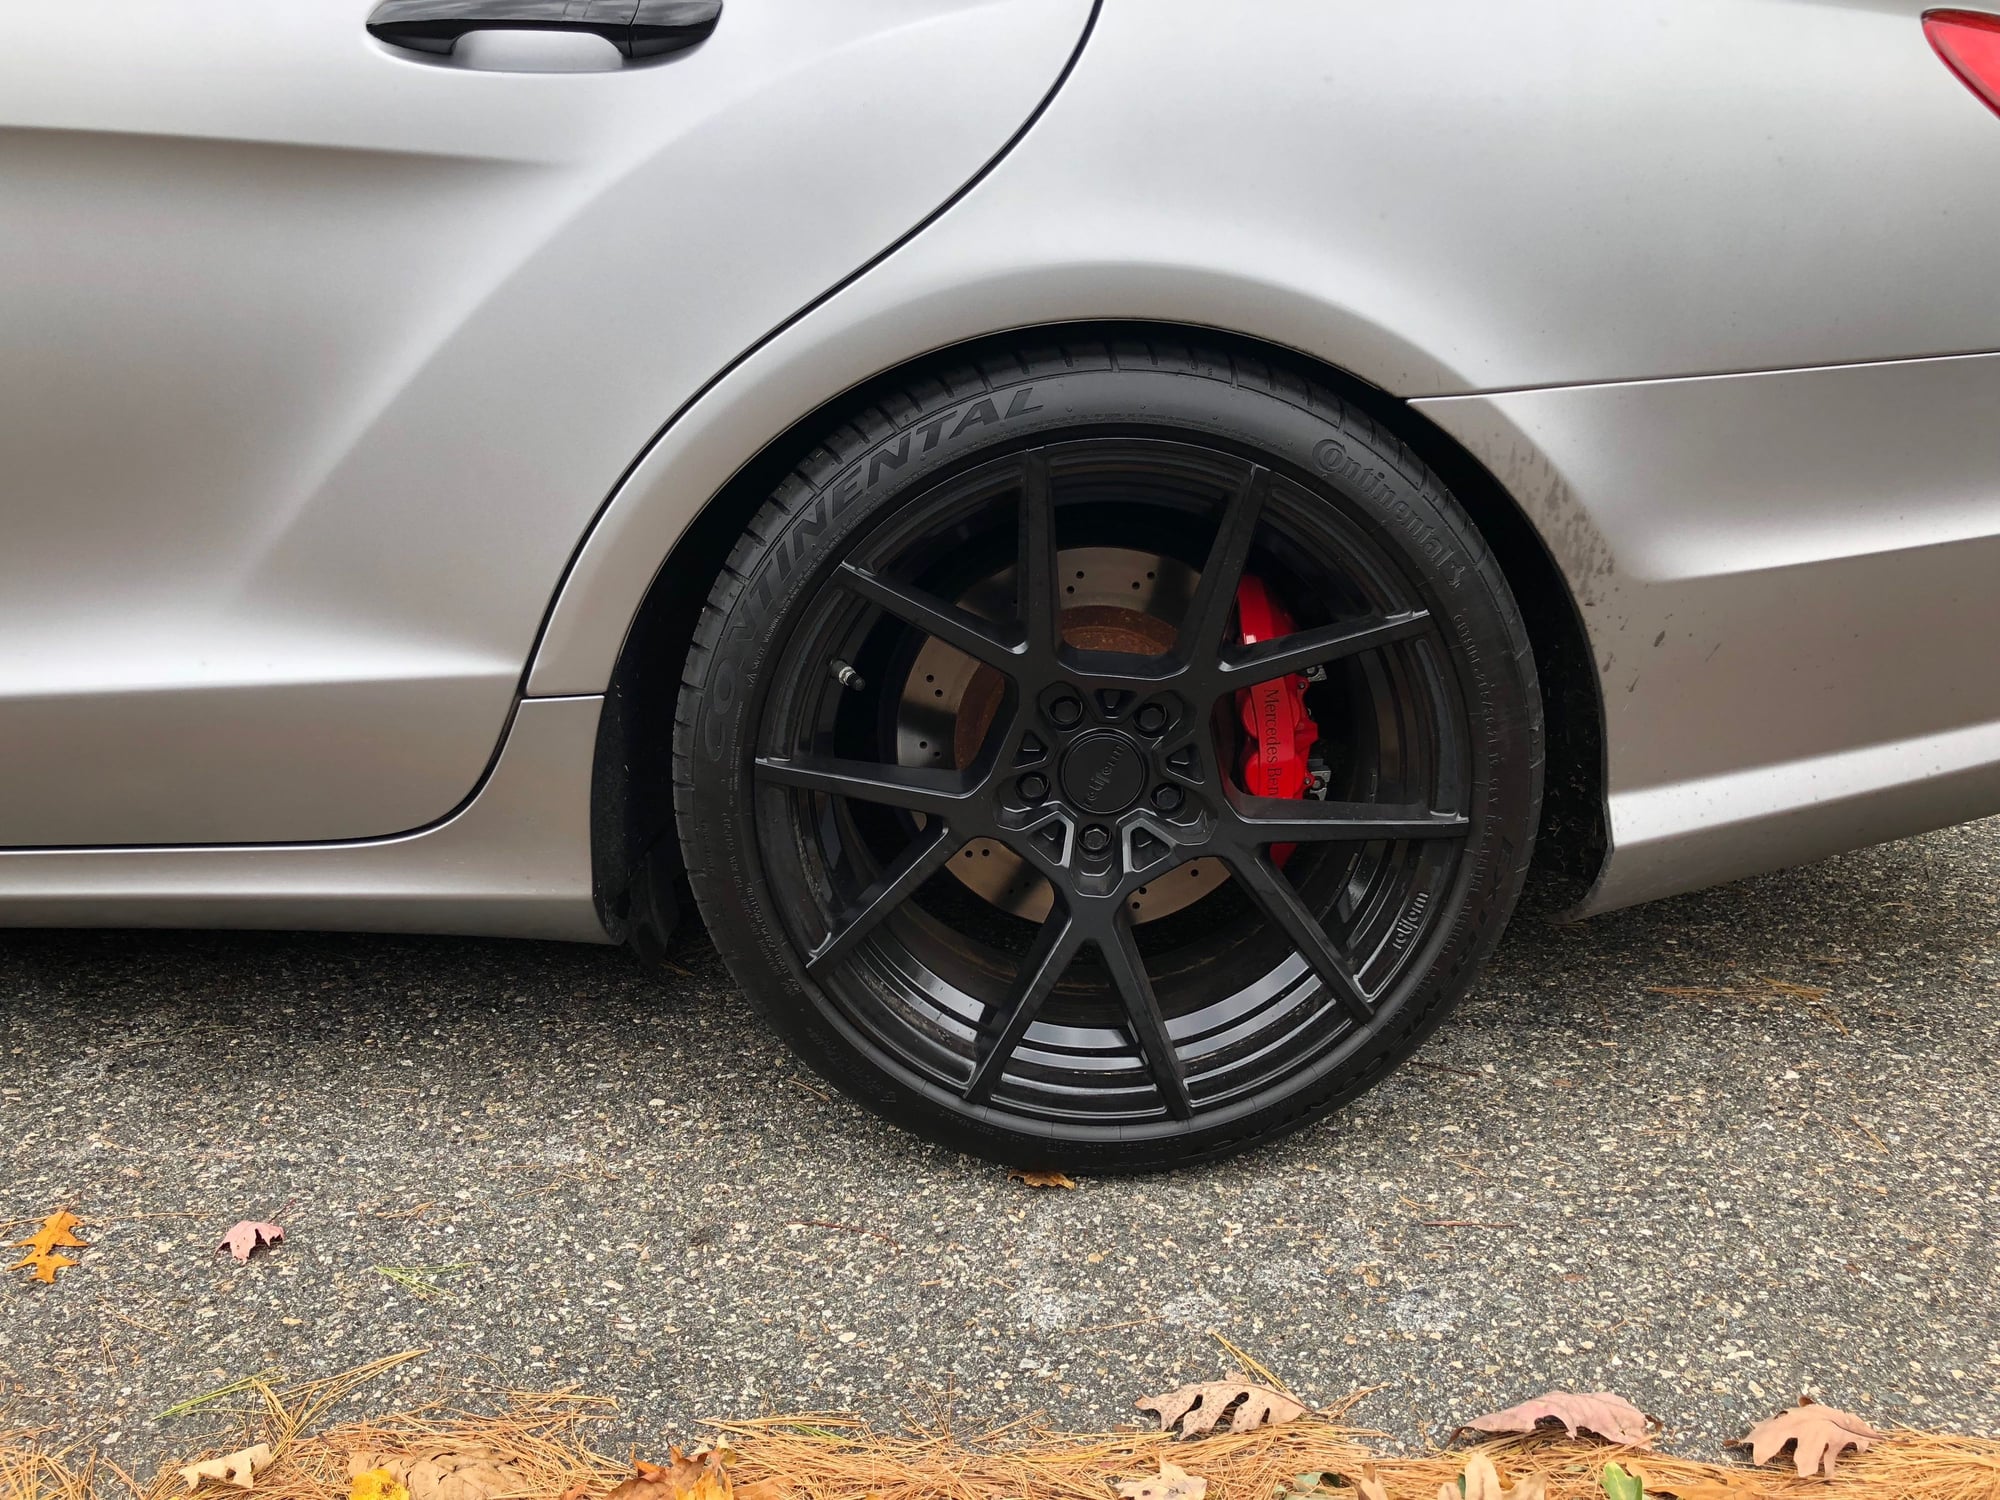 Wheels and Tires/Axles - Rotiform KPS 19x8.5/19x10 TIRES OPTIONAL - Used - Newark, NJ 07105, United States